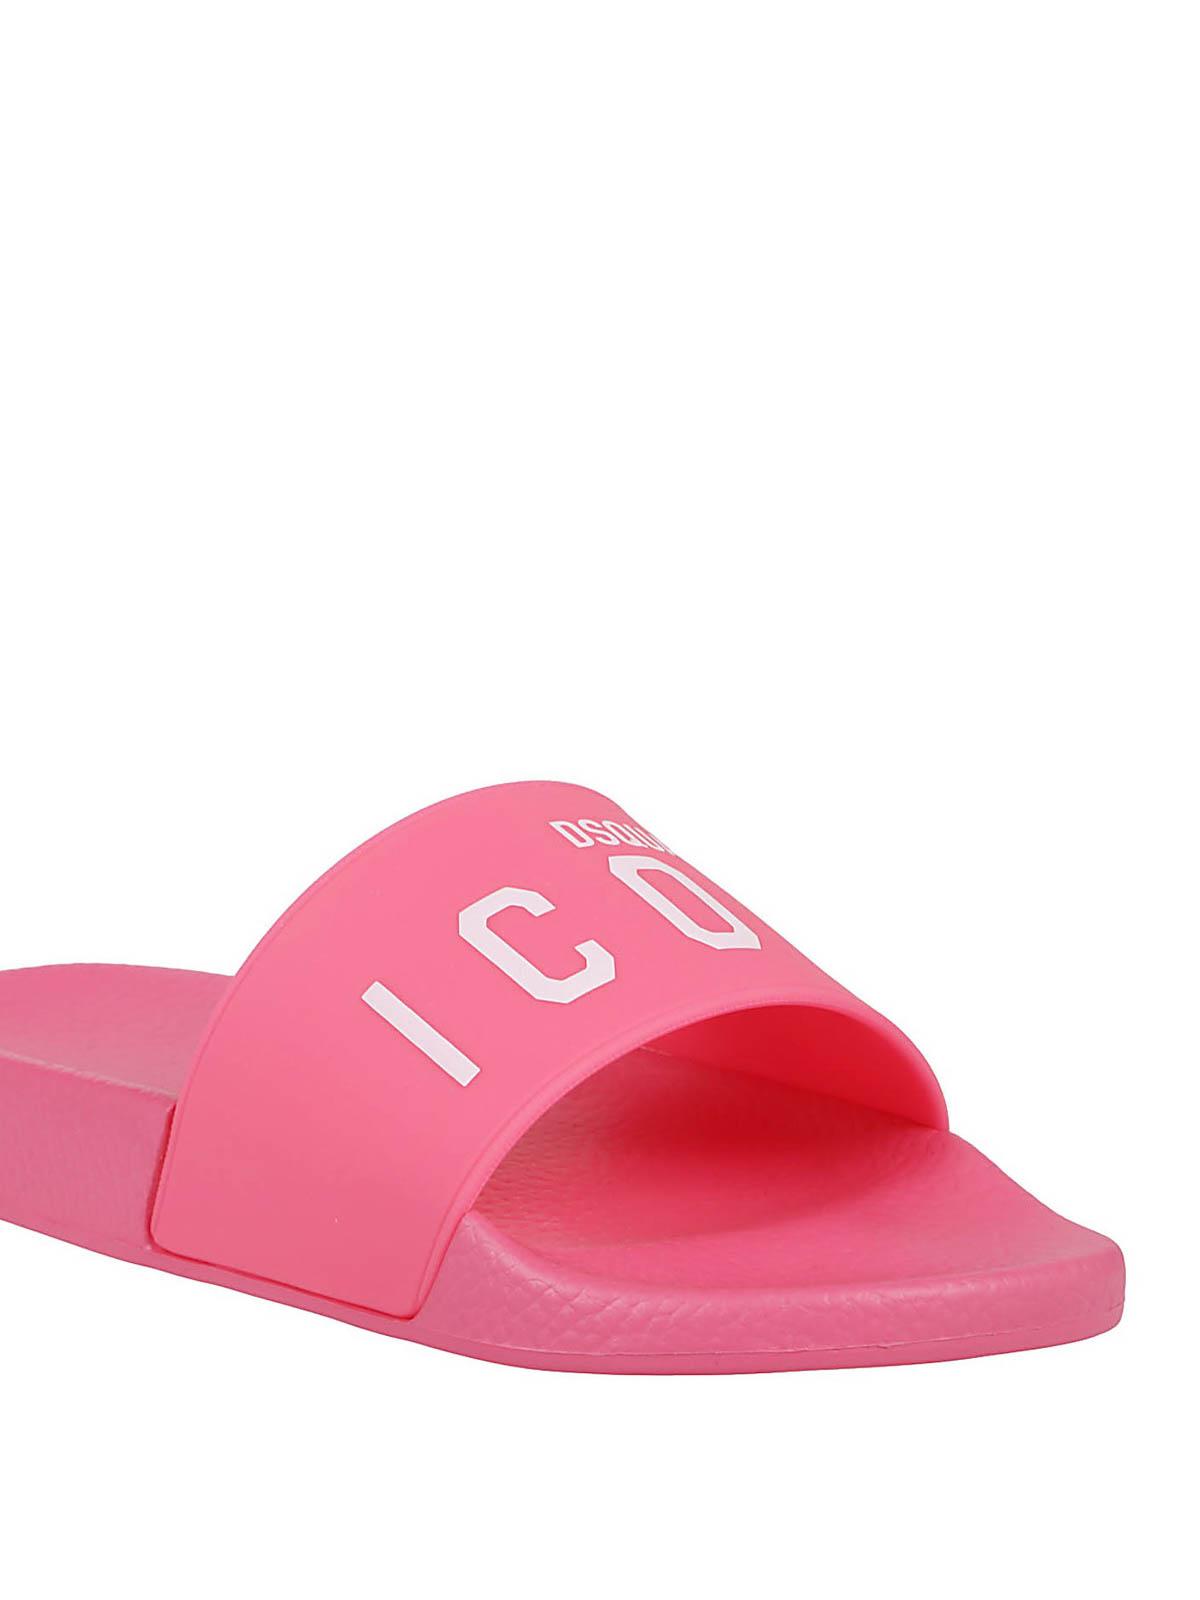 DSquared² Rubber Icon Slides in Pink - Lyst